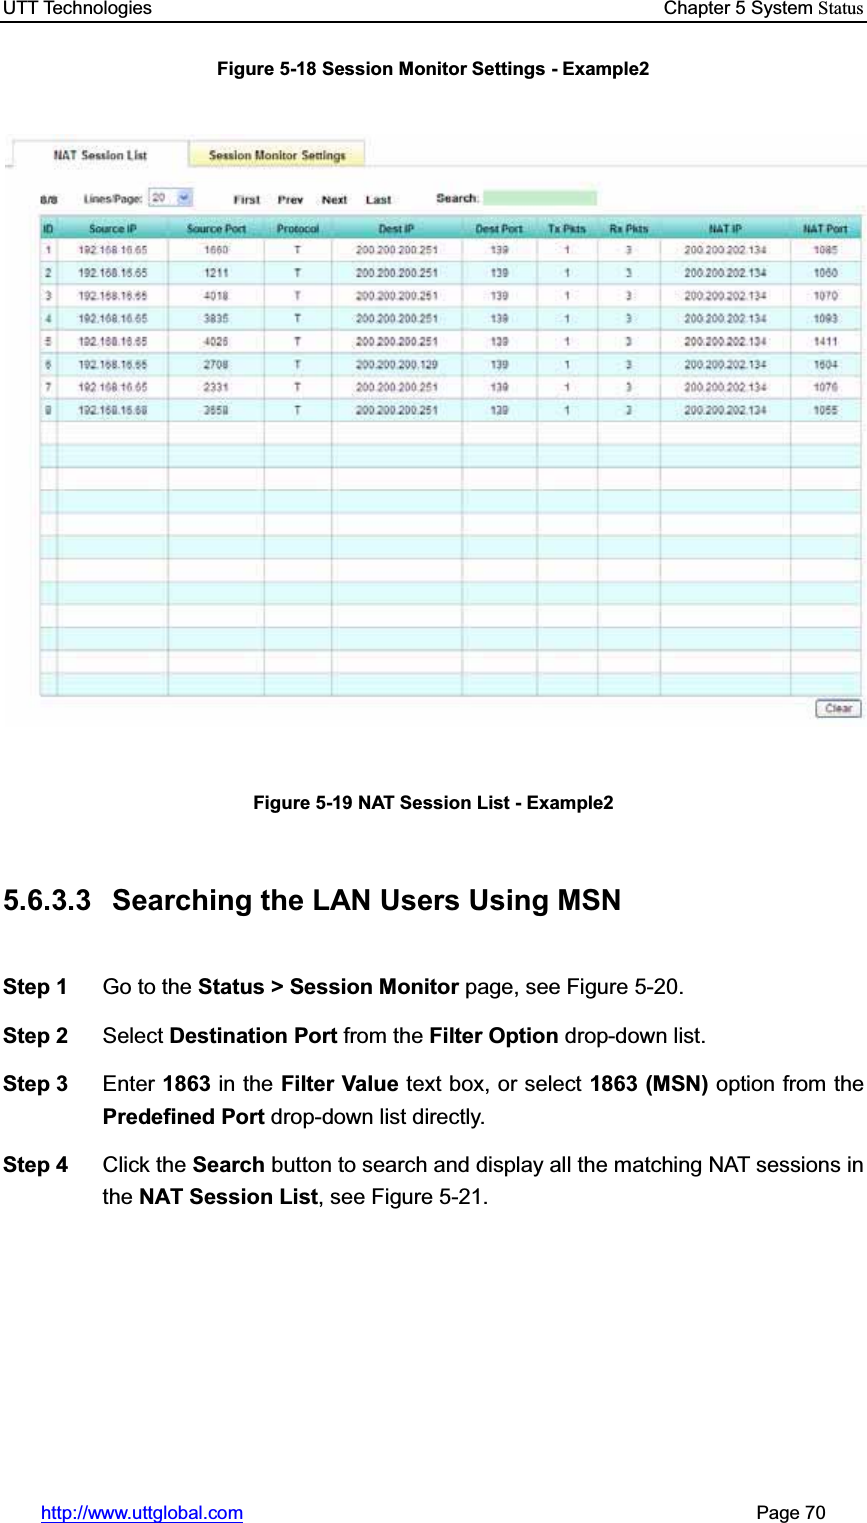 UTT Technologies    Chapter 5 System Statushttp://www.uttglobal.com                                                       Page 70 Figure 5-18 Session Monitor Settings - Example2 Figure 5-19 NAT Session List - Example2 5.6.3.3 Searching the LAN Users Using MSN Step 1  Go to the Status &gt; Session Monitor page, see Figure 5-20. Step 2  Select Destination Port from the Filter Option drop-down list. Step 3  Enter 1863 in the Filter Value text box, or select 1863 (MSN) option from thePredefined Port drop-down list directly. Step 4  Click the Search button to search and display all the matching NAT sessions in the NAT Session List, see Figure 5-21. 